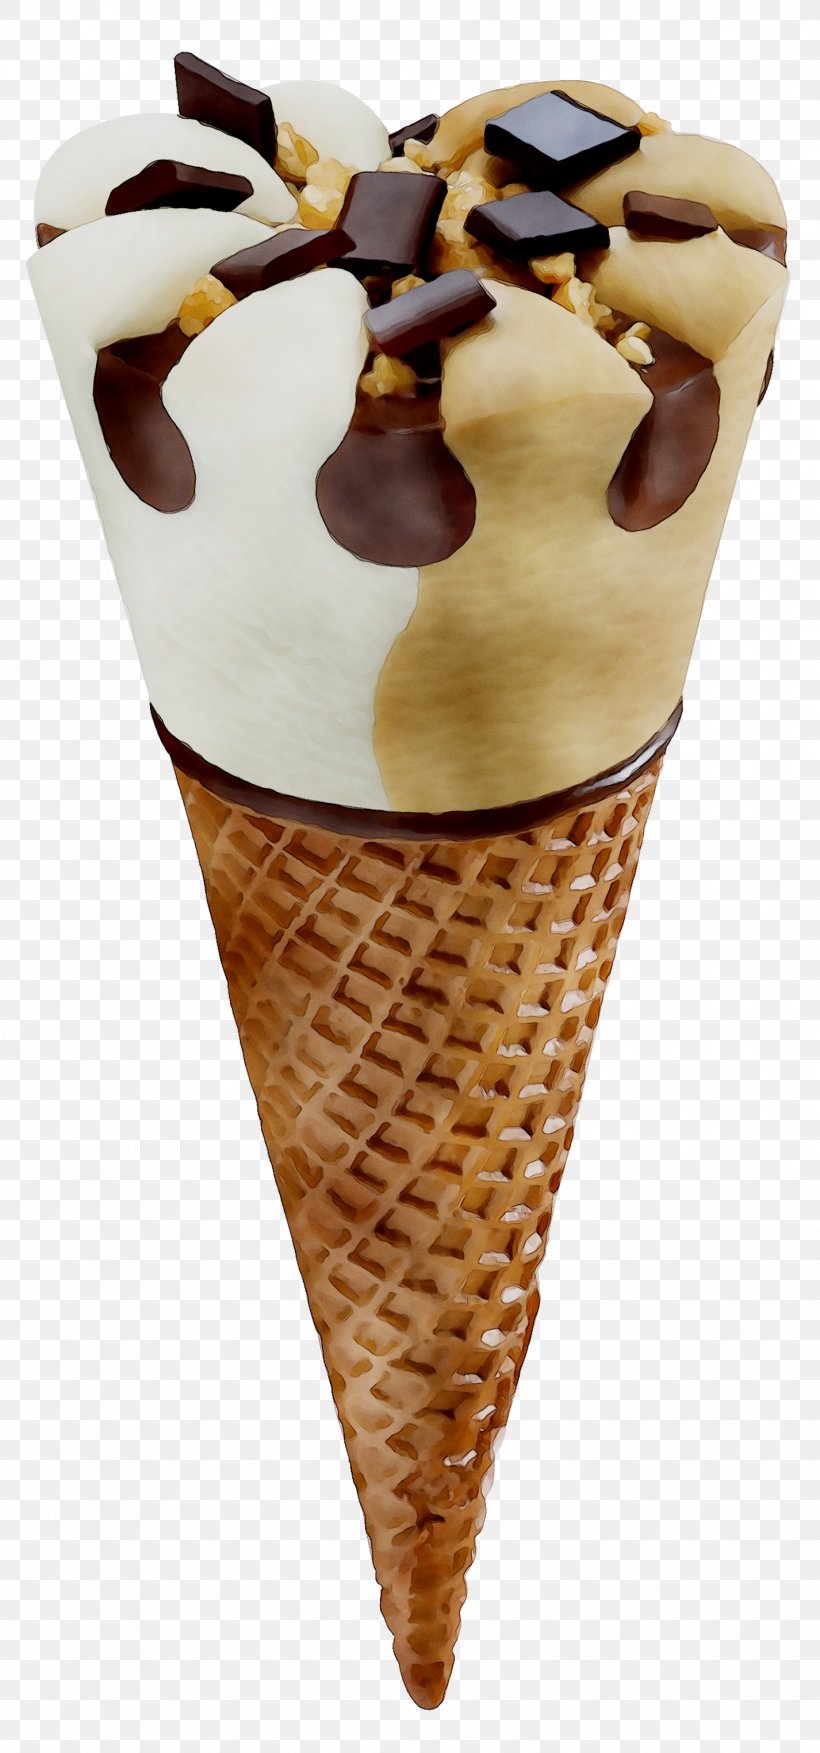 Ice Cream Cones Butterscotch Breyers, PNG, 1426x3050px, Ice Cream Cones, Breyers, Butterscotch, Chocolate, Chocolate Ice Cream Download Free